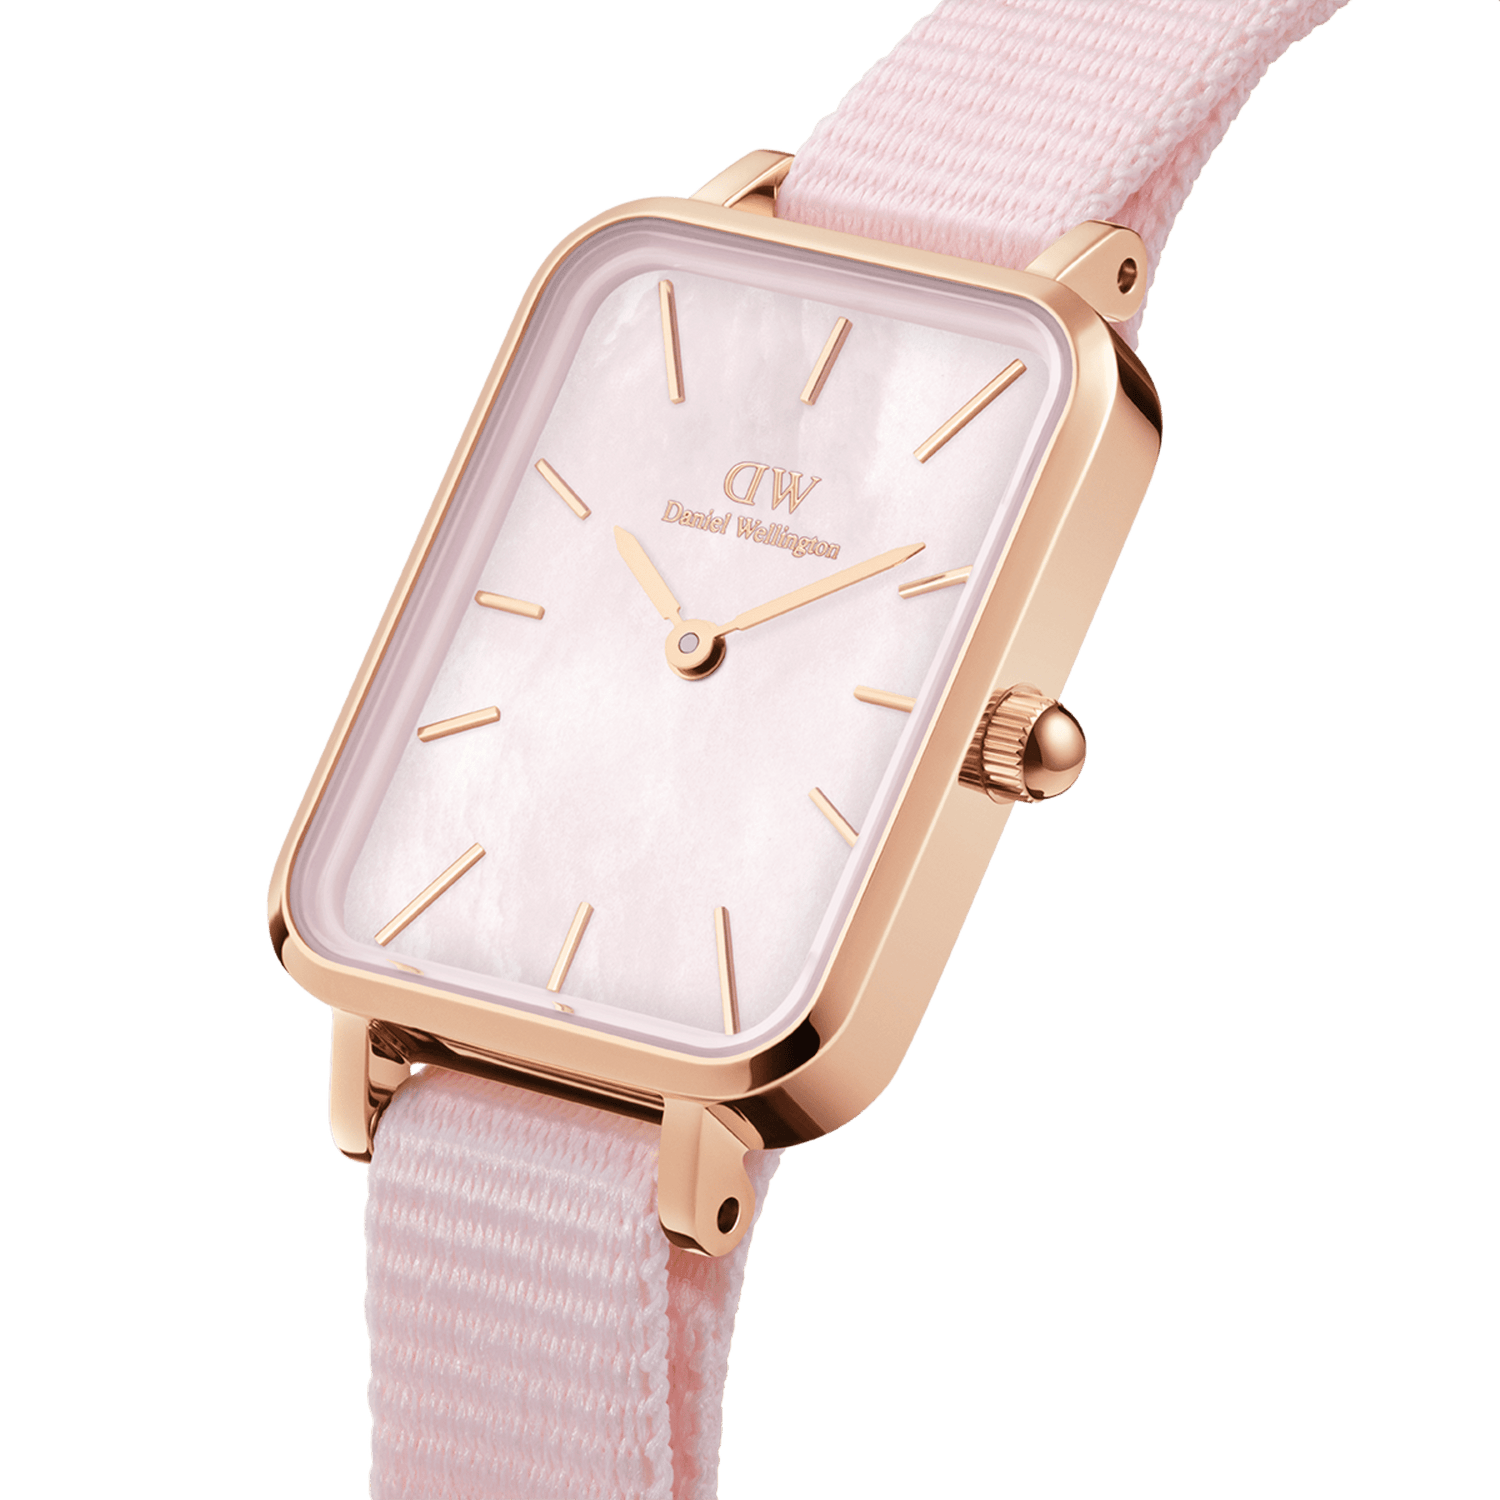 Quadro Pressed Rouge - Pink Women's Watch | DW